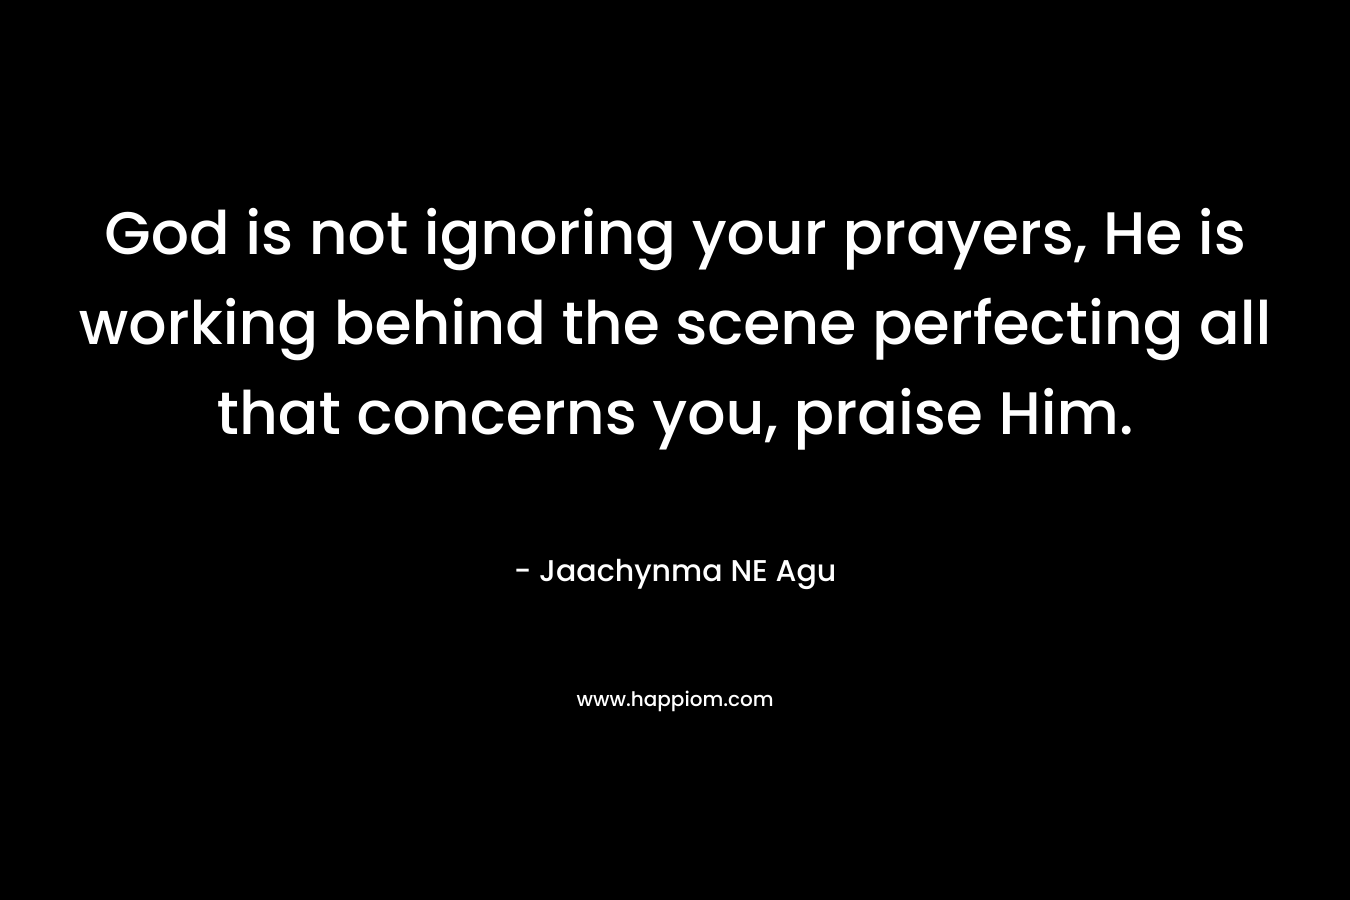 God is not ignoring your prayers, He is working behind the scene perfecting all that concerns you, praise Him.